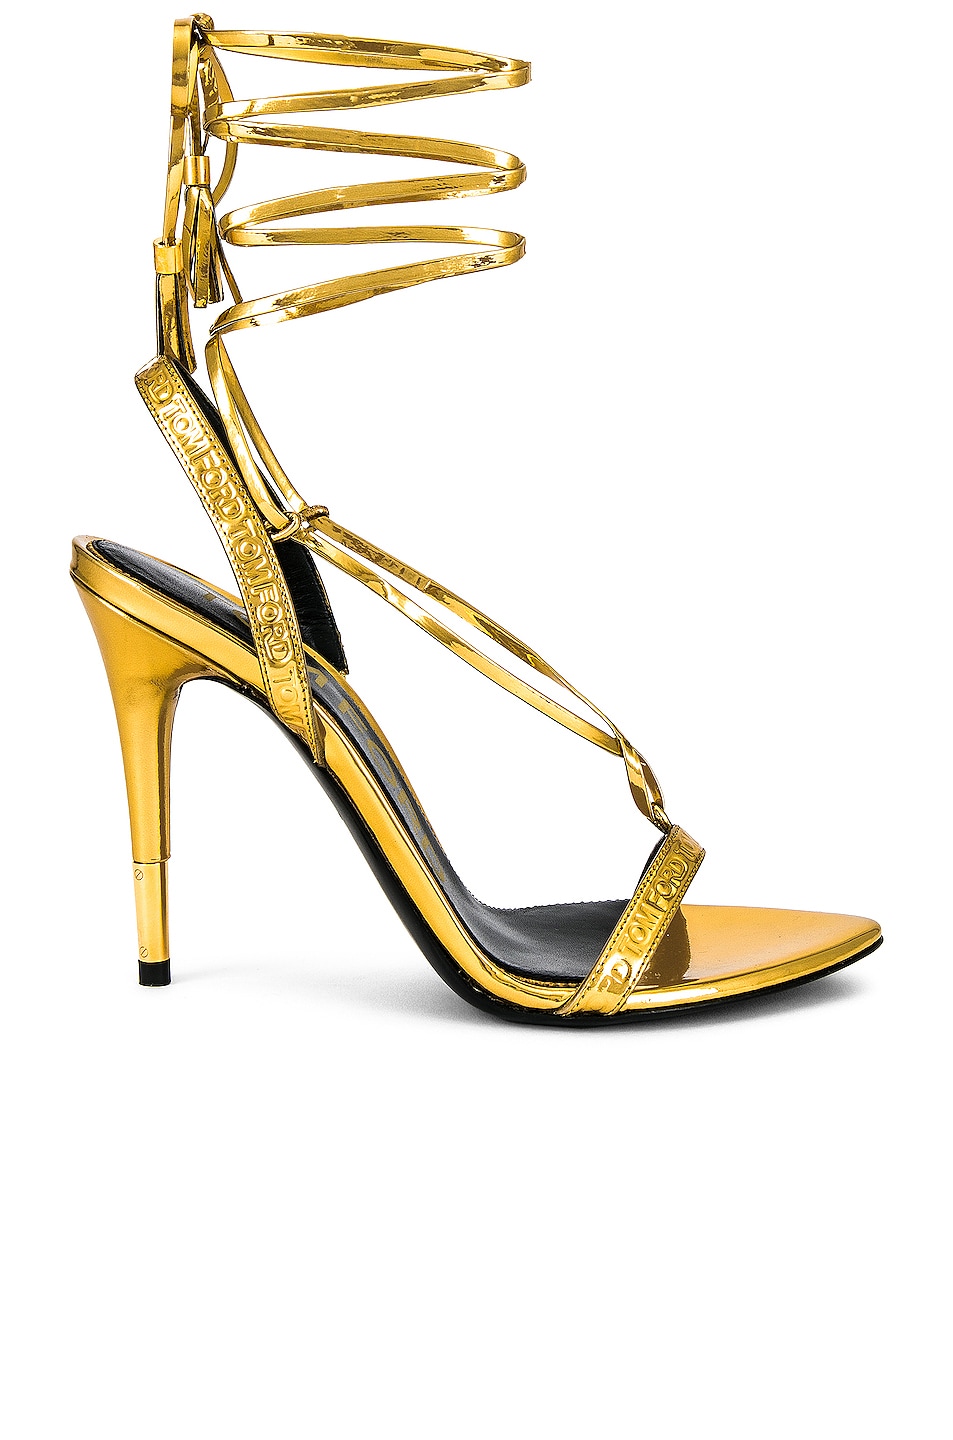 TOM FORD Mirror Ankle Wrap Sandal in Gold | FWRD